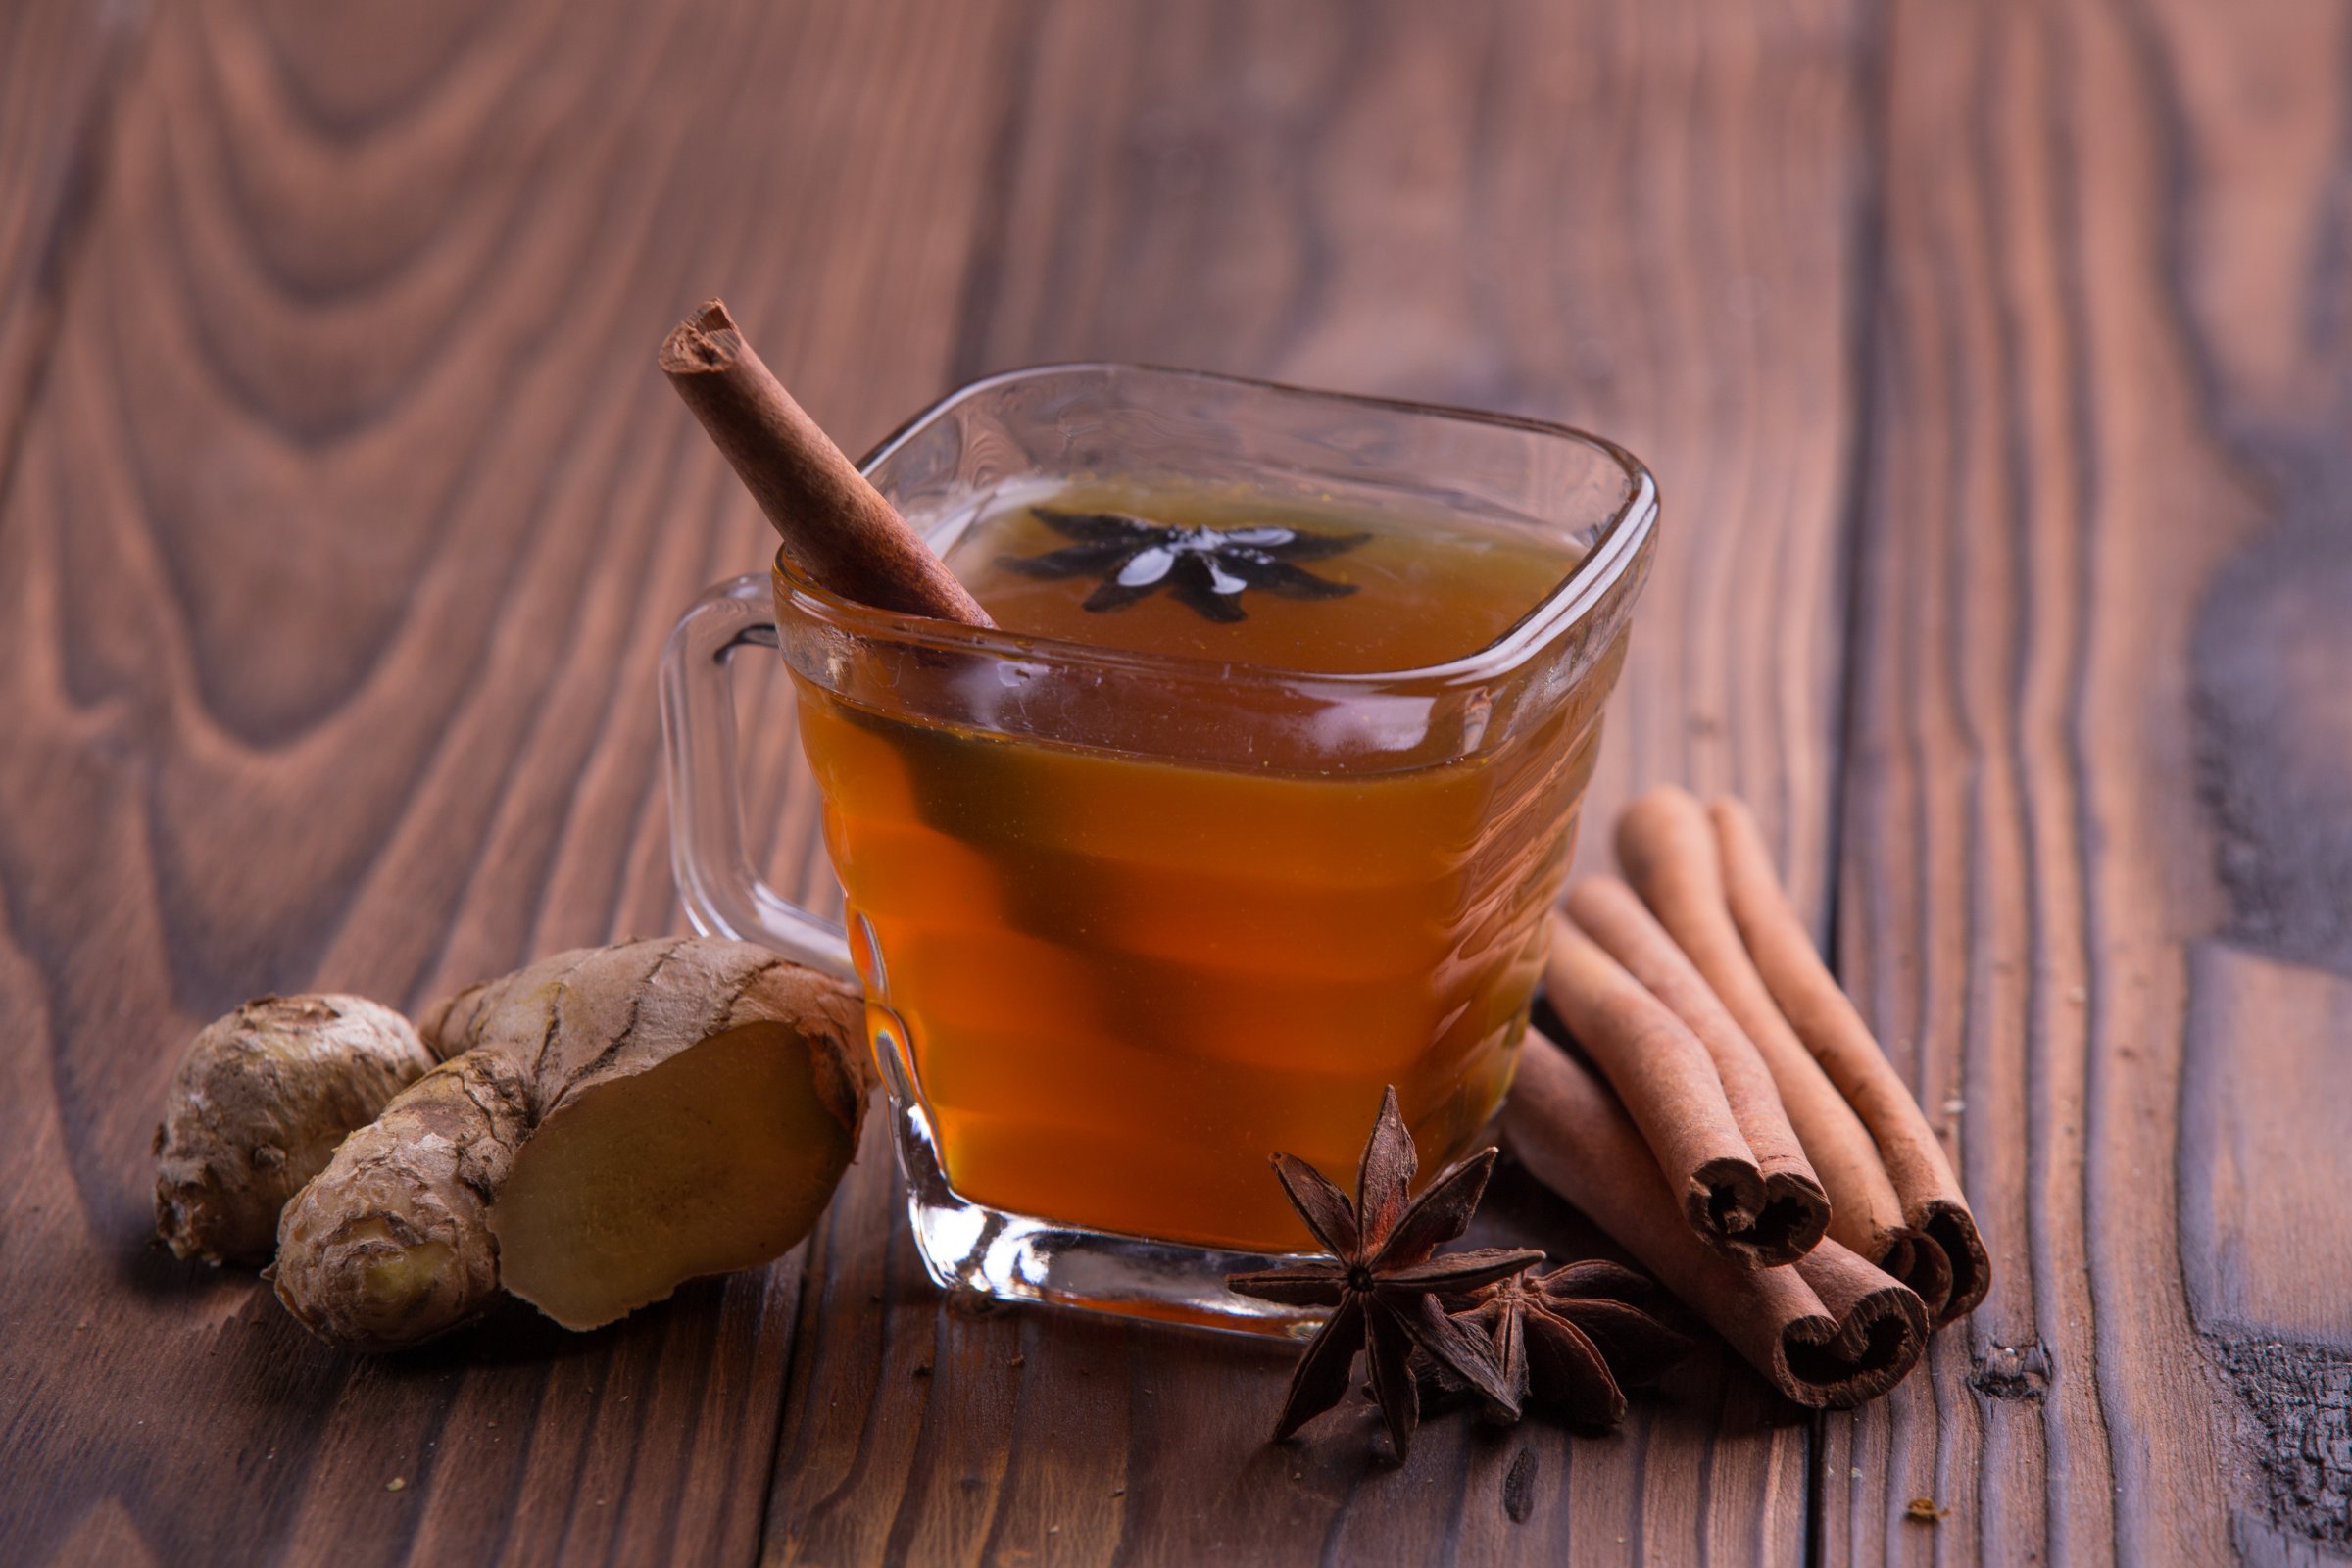 Warm drink for winter: tea, cinnamon, star anise, and ginger